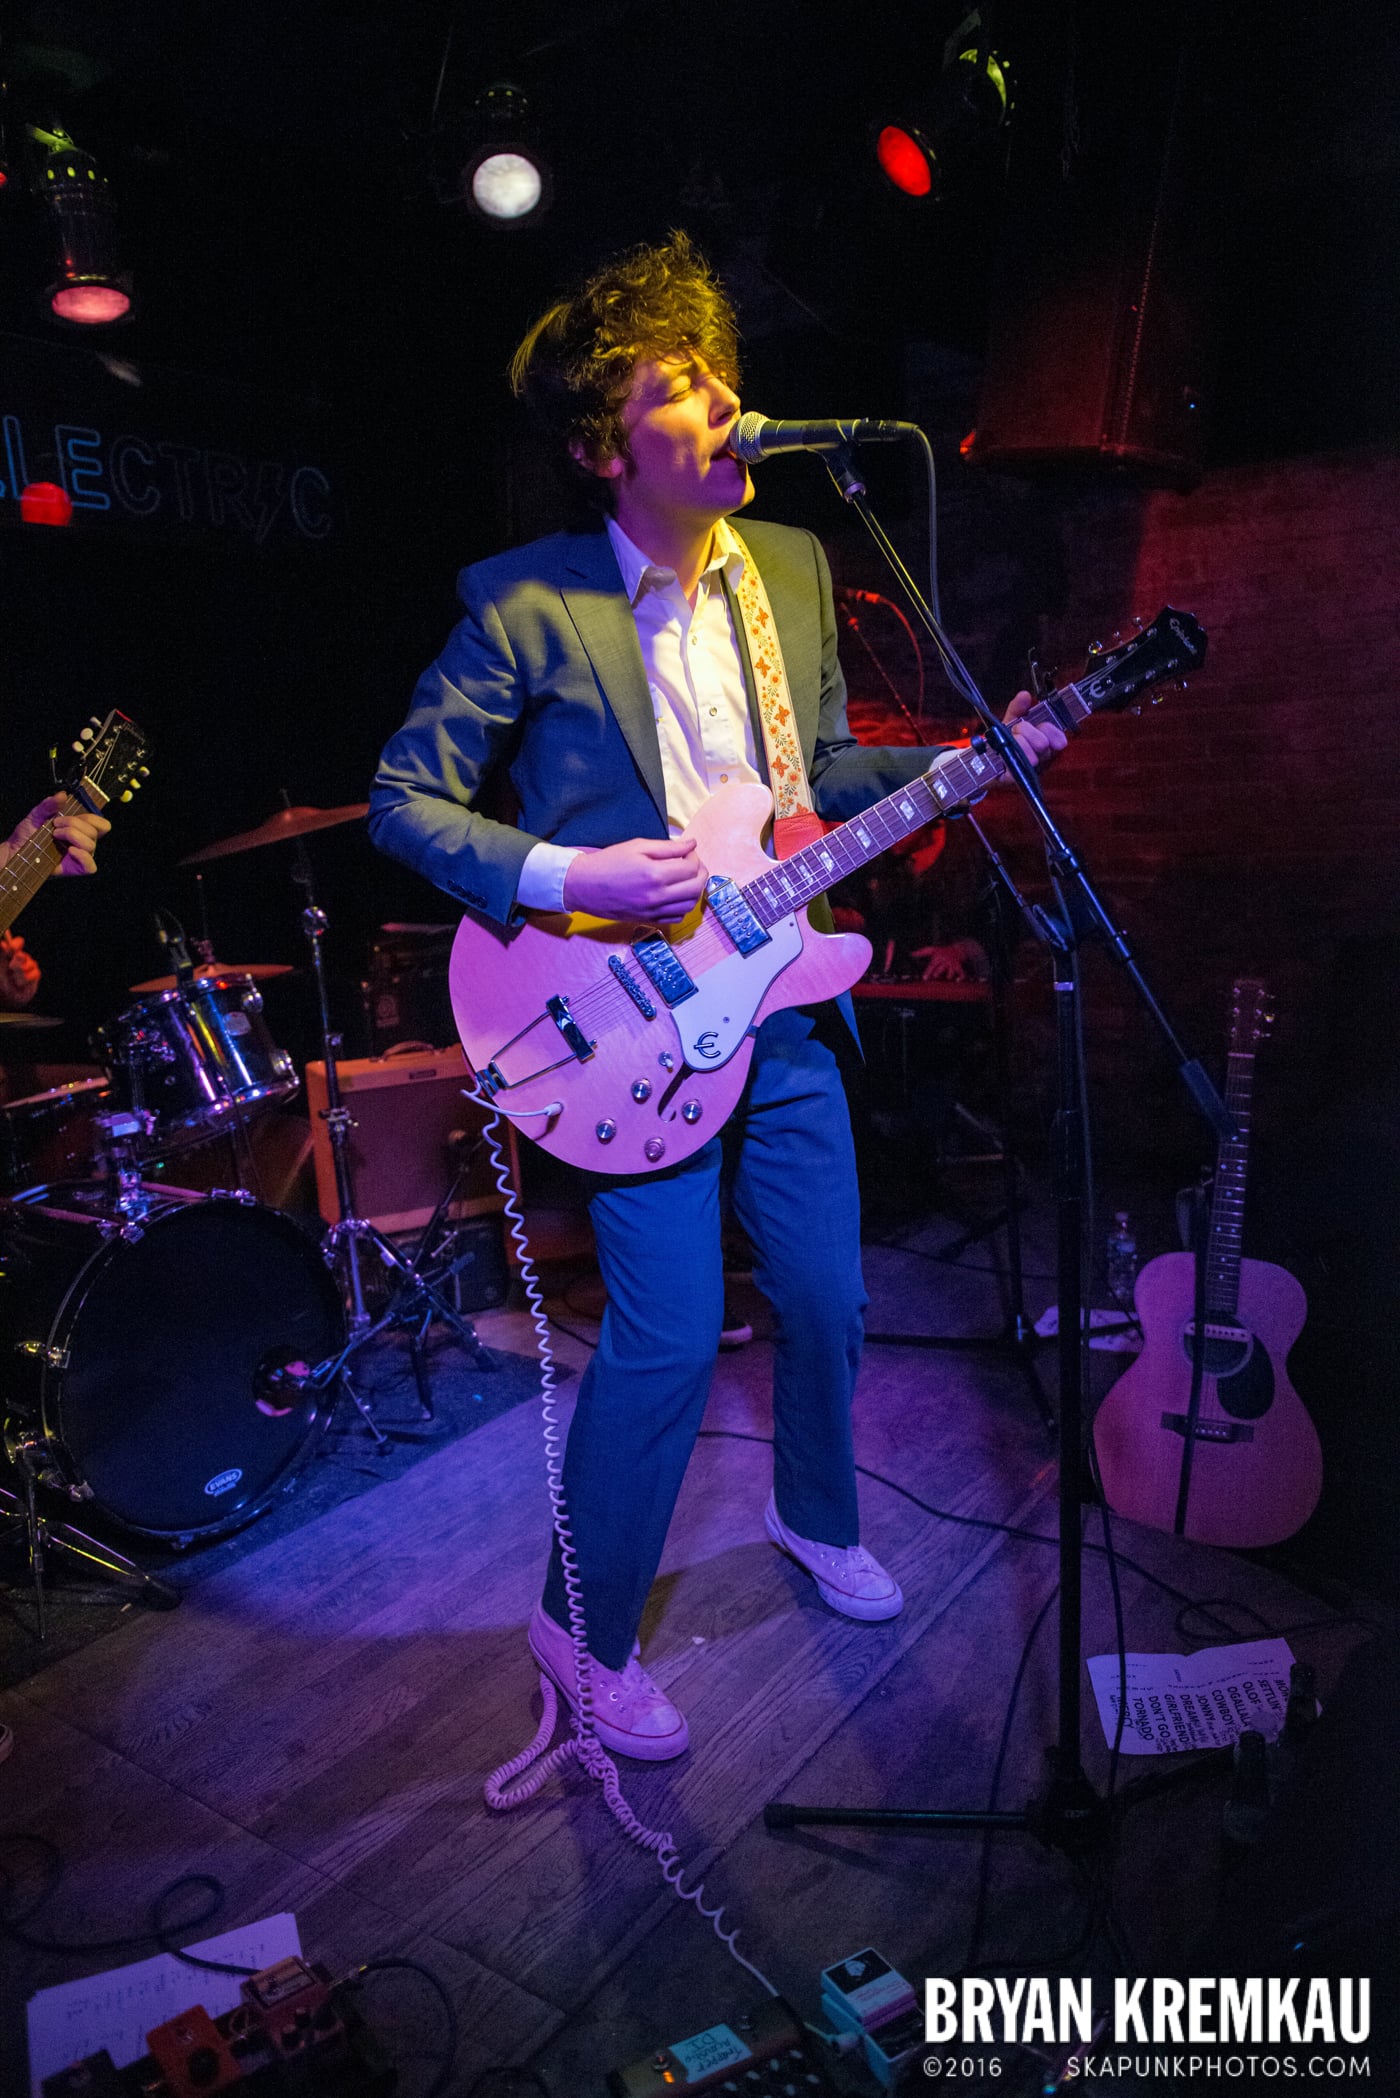 Trapper Schoepp & The Shades @ Bowery Electric, NYC - 11.20.14 (61)